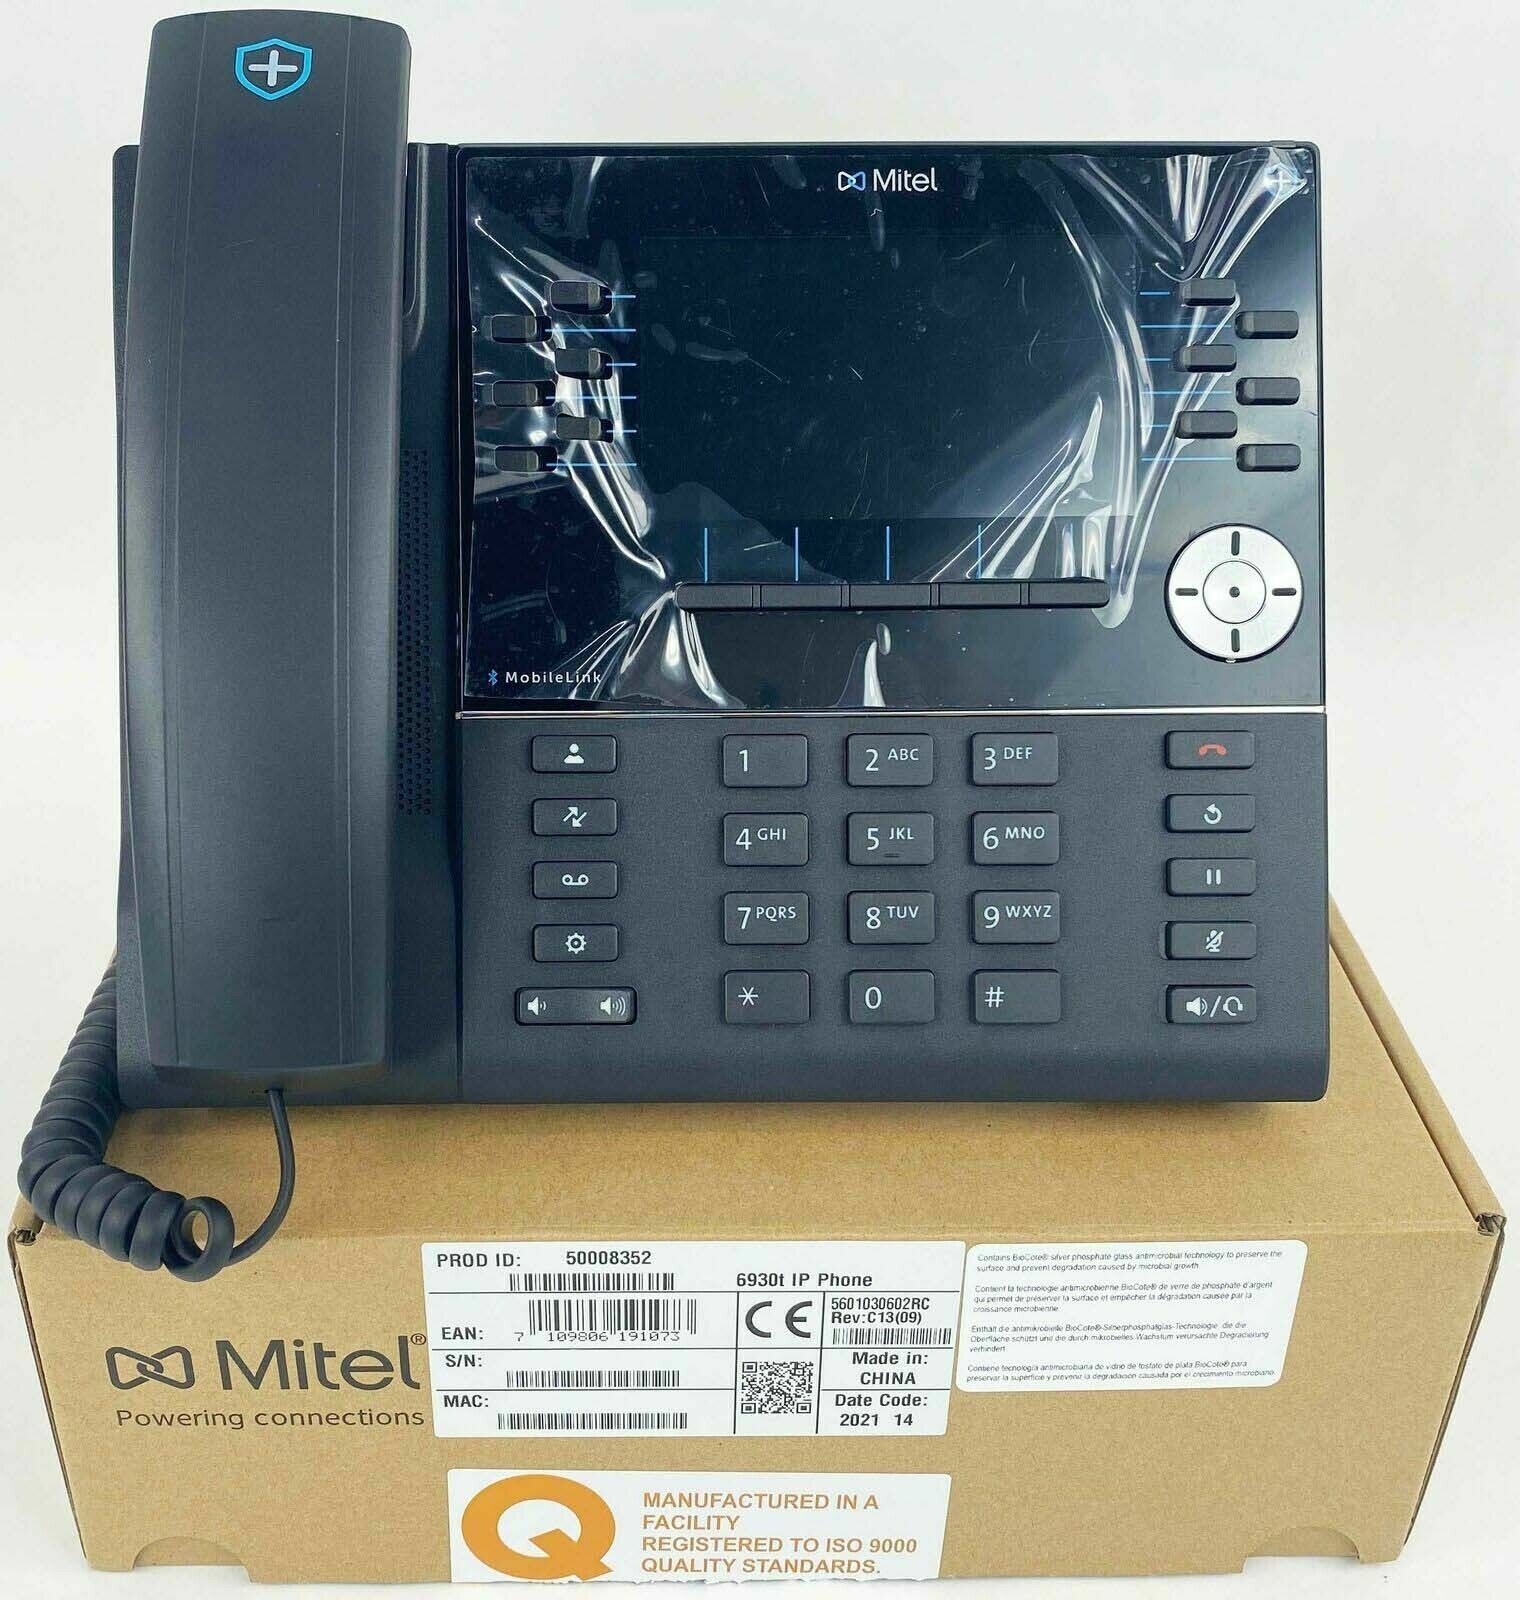 MITEL 6930T ANTIMICROBIAL IP PHONE NEW 50008352 WITH A 1 YEAR WARRANTY